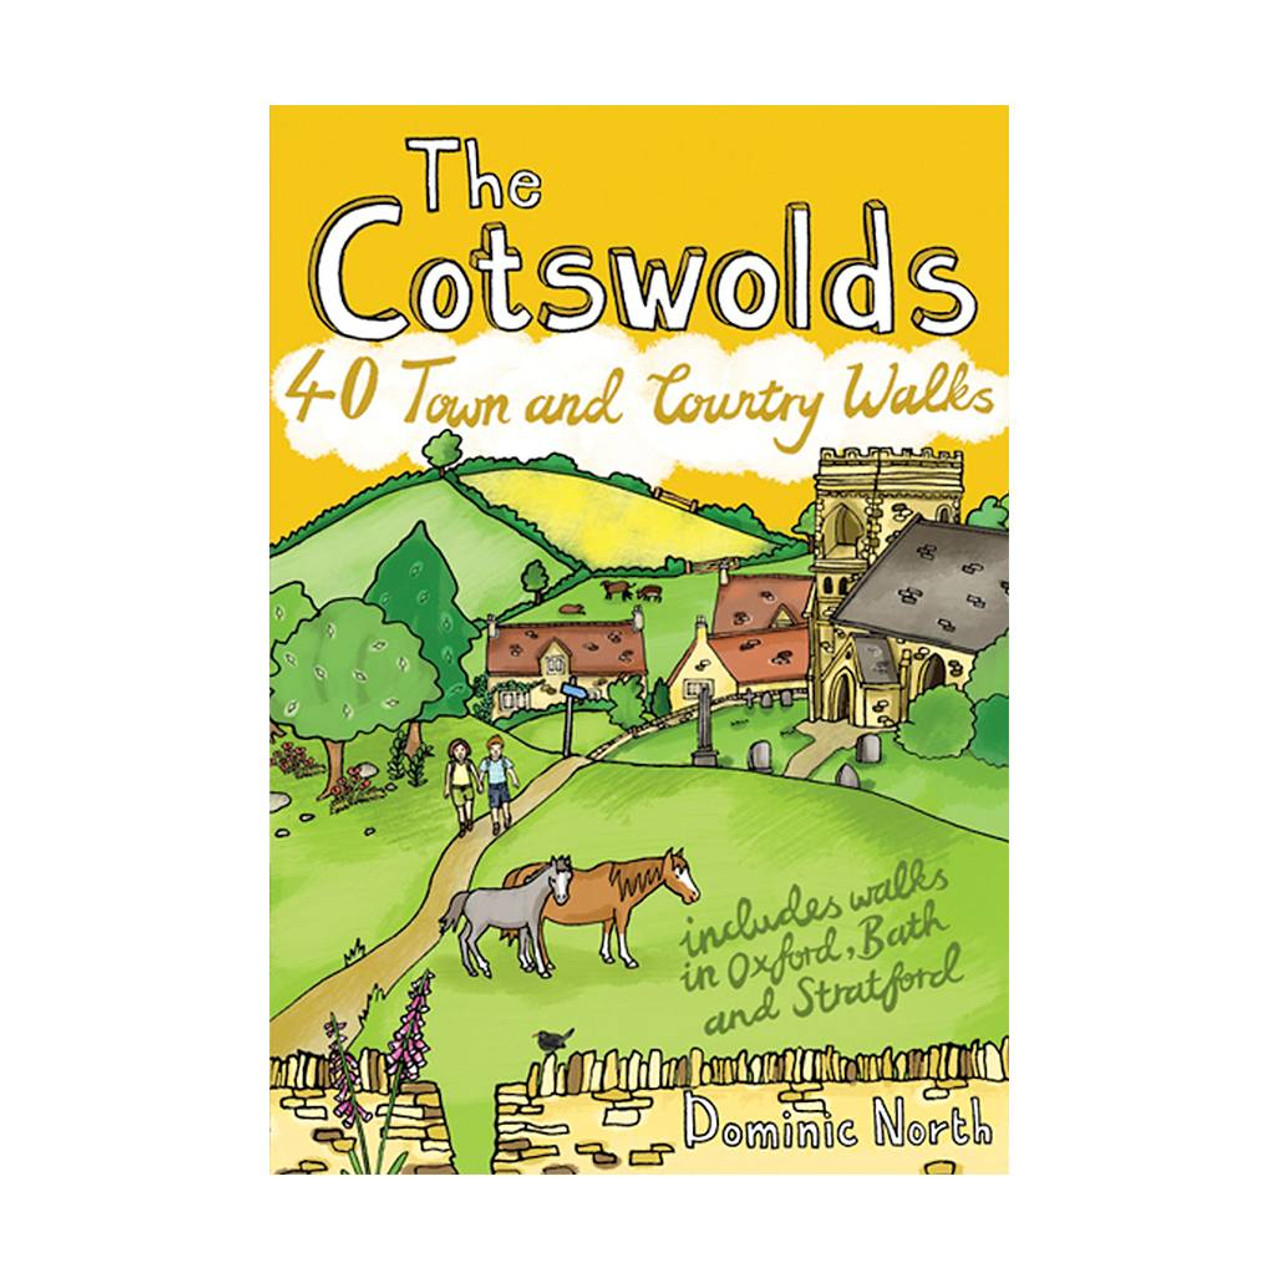 The Cotswolds: 40 TownandCountry Walks